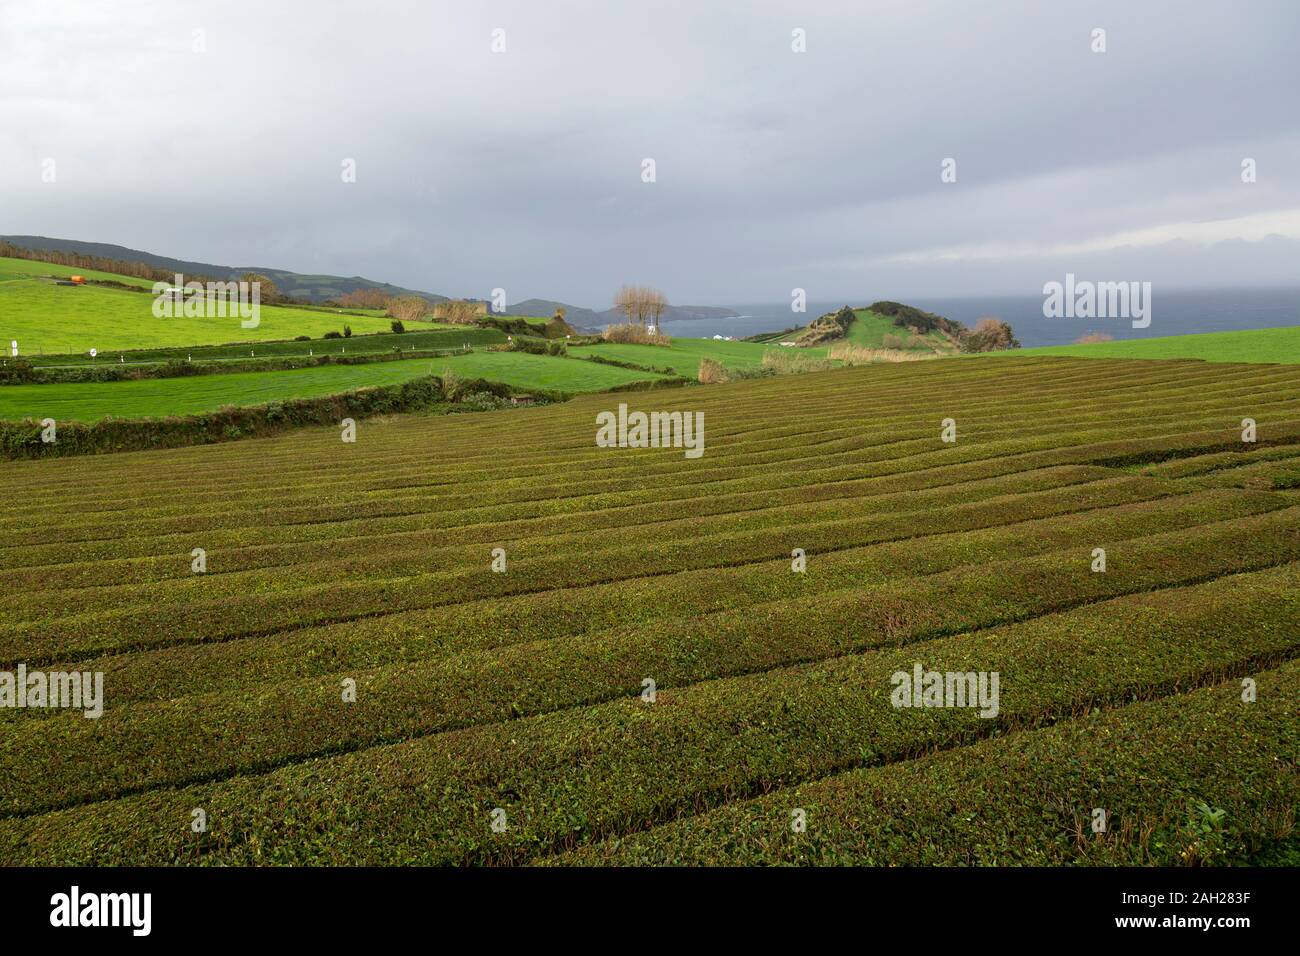 Rows of tea plants at the Gorreana Tea Plantation and Factory on the island of Sao Miguel in the Azores. Stock Photo